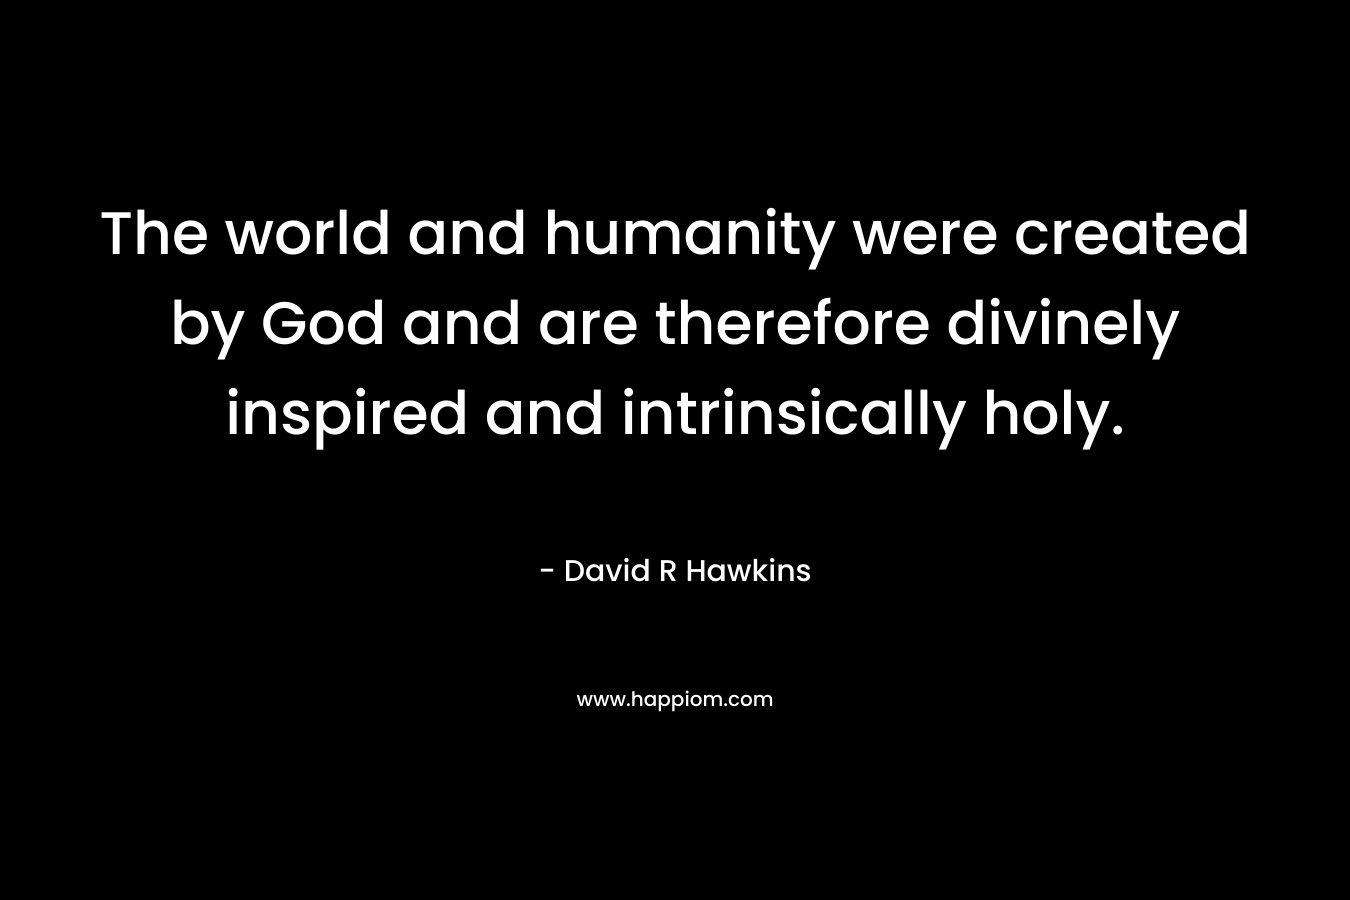 The world and humanity were created by God and are therefore divinely inspired and intrinsically holy.